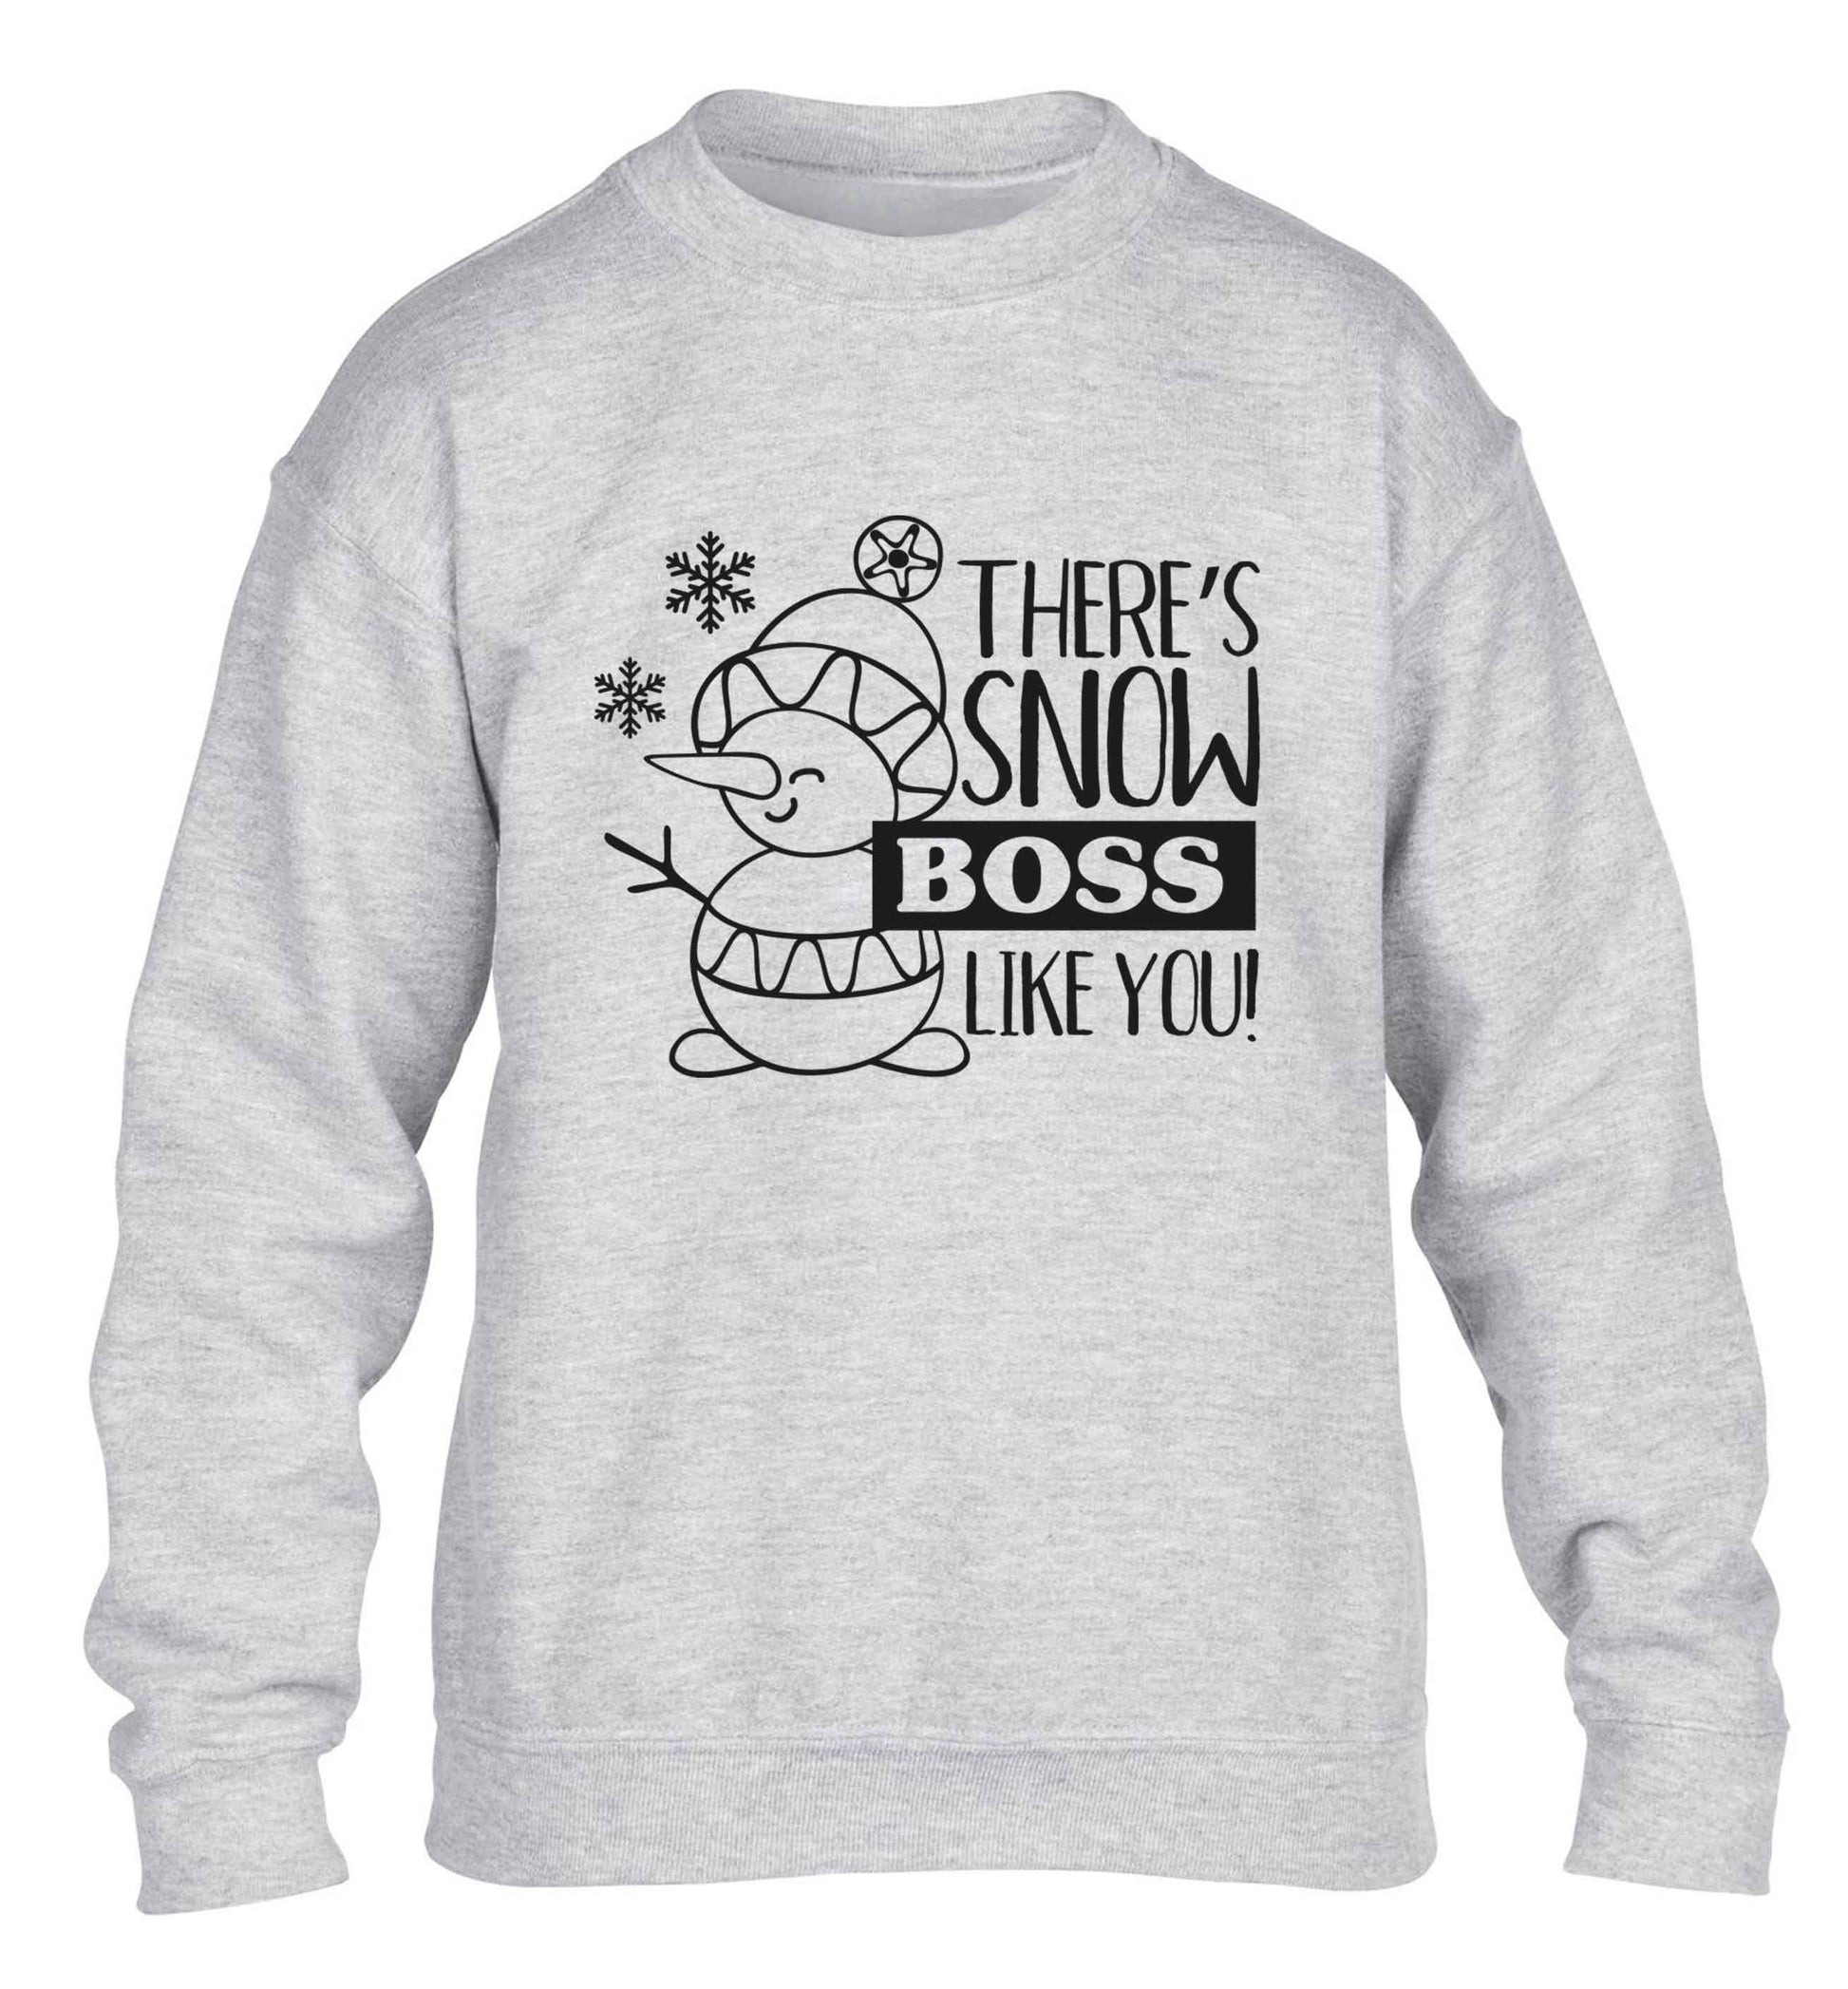 There's snow boss like you children's grey sweater 12-13 Years